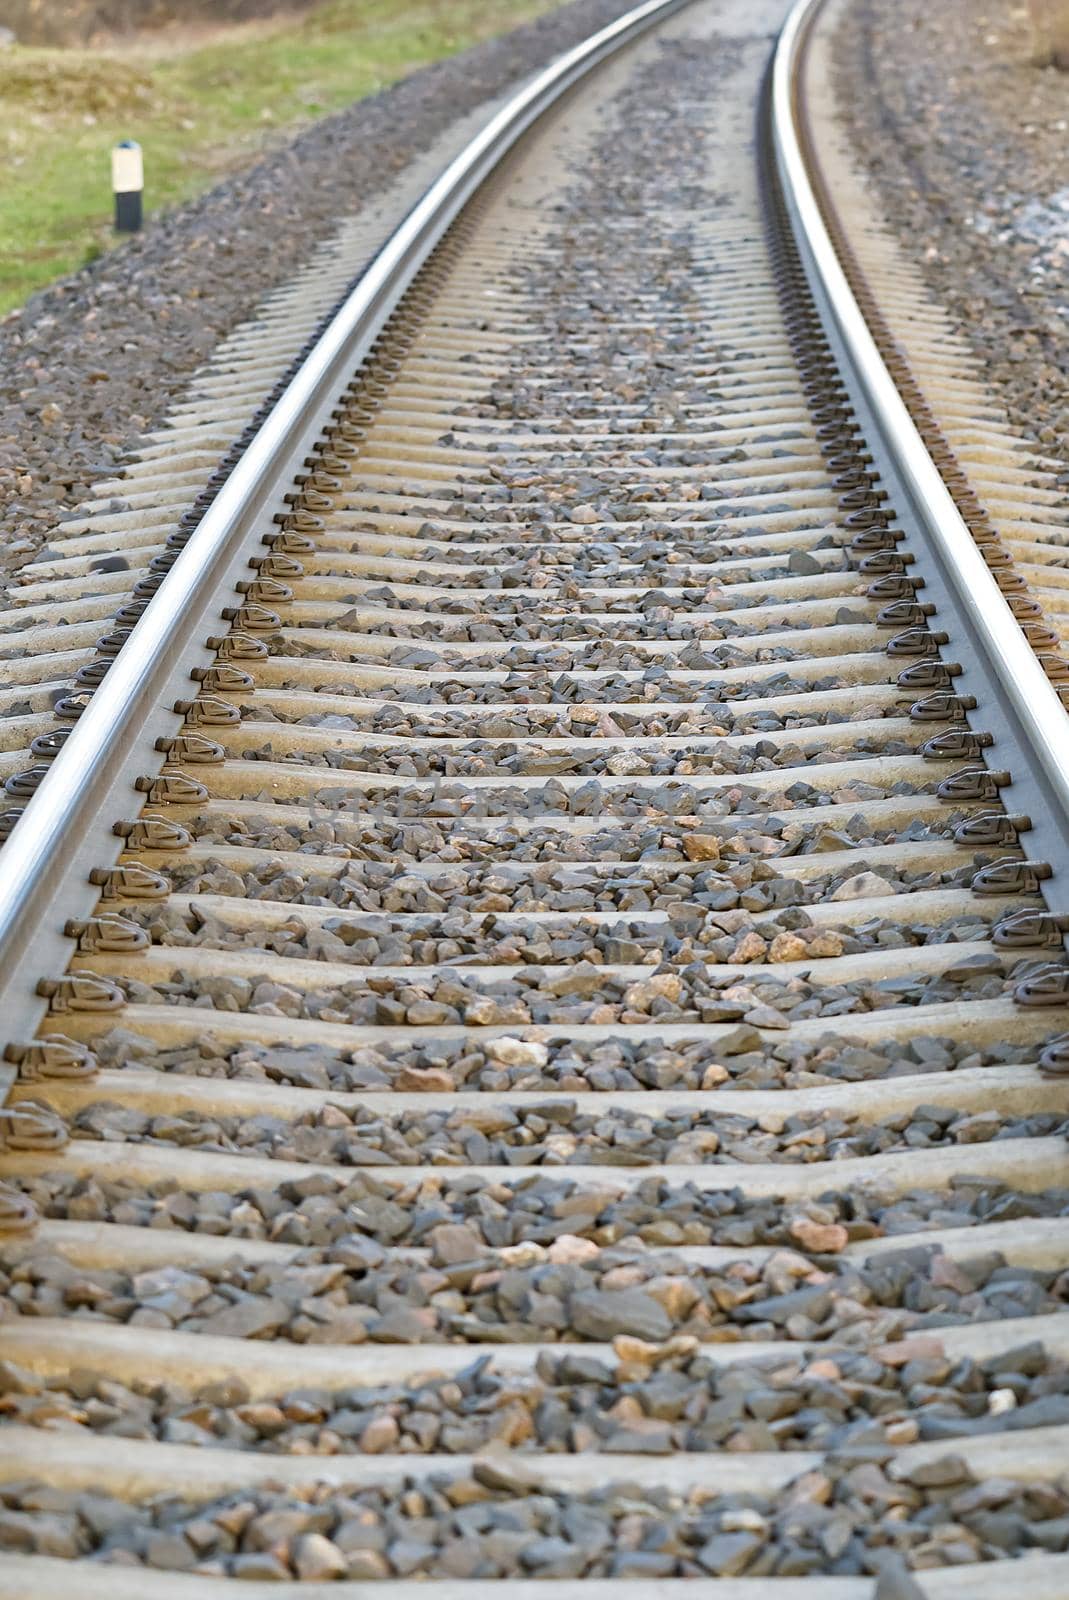 railroad rails on concrete sleepers. updated railway for high-speed, express train railway, close-up, Estonia